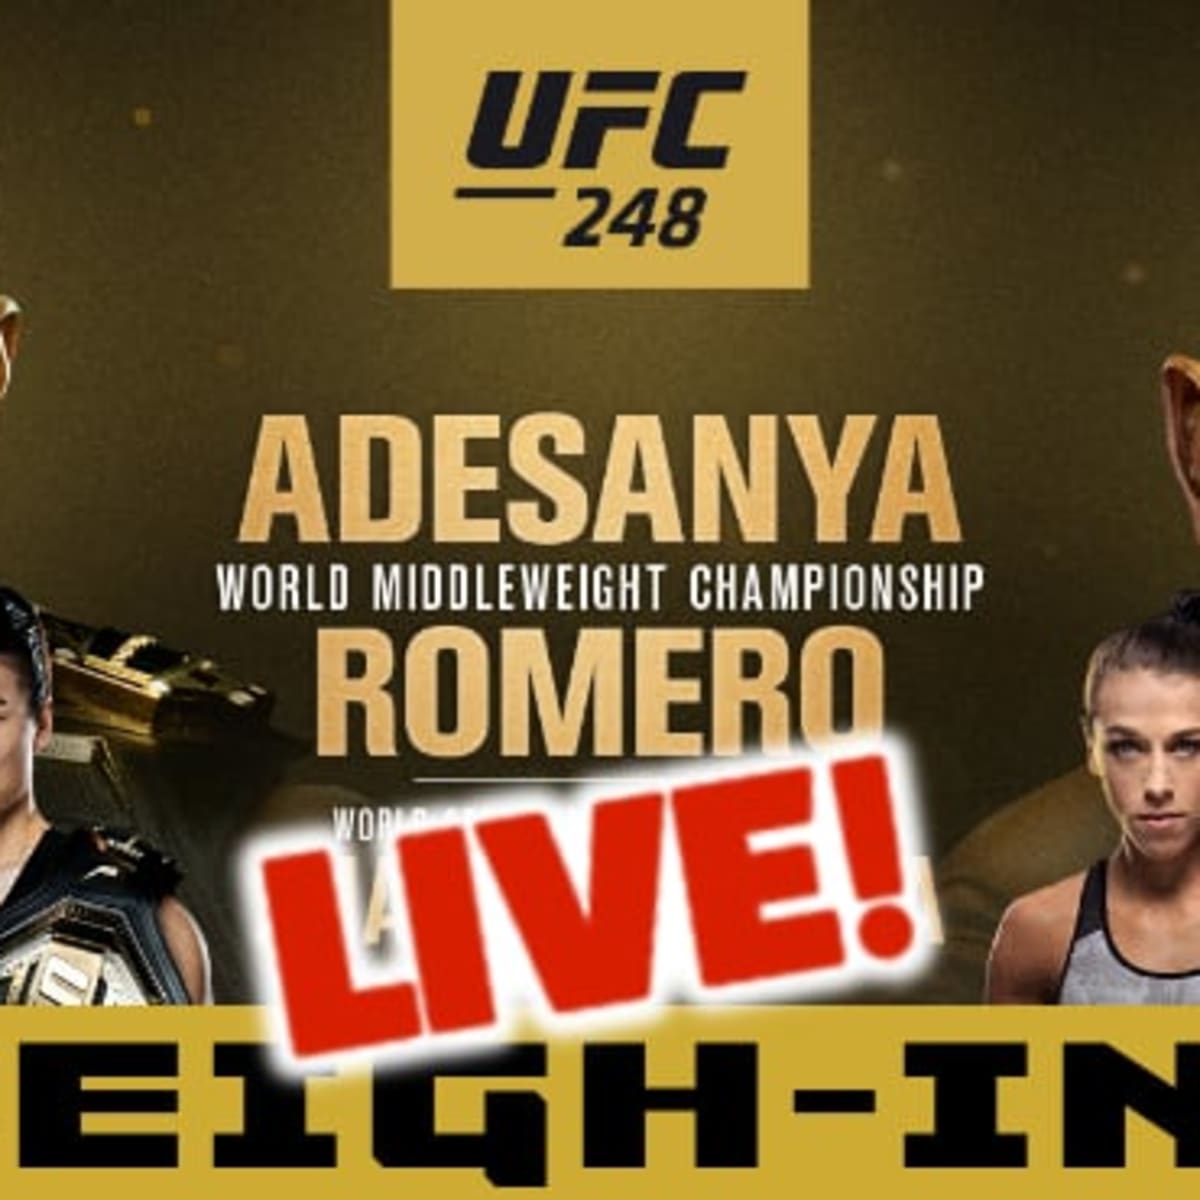 UFC 248 Adesanya vs Romero LIVE Weigh-in Video and Results